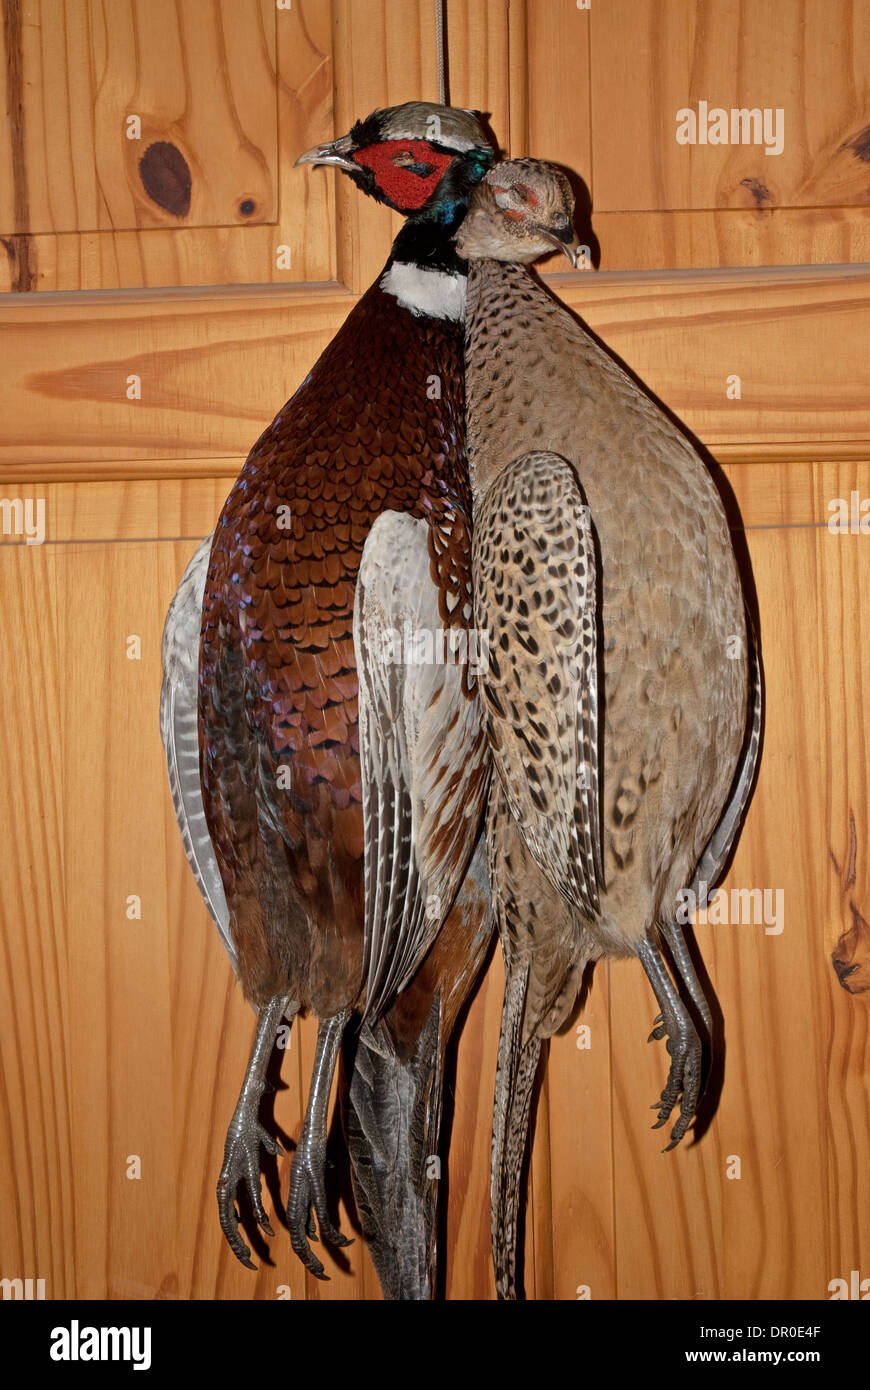 A brace of hanging Pheasants (Phasianus colchicus) preserved by taxidermy Stock Photo